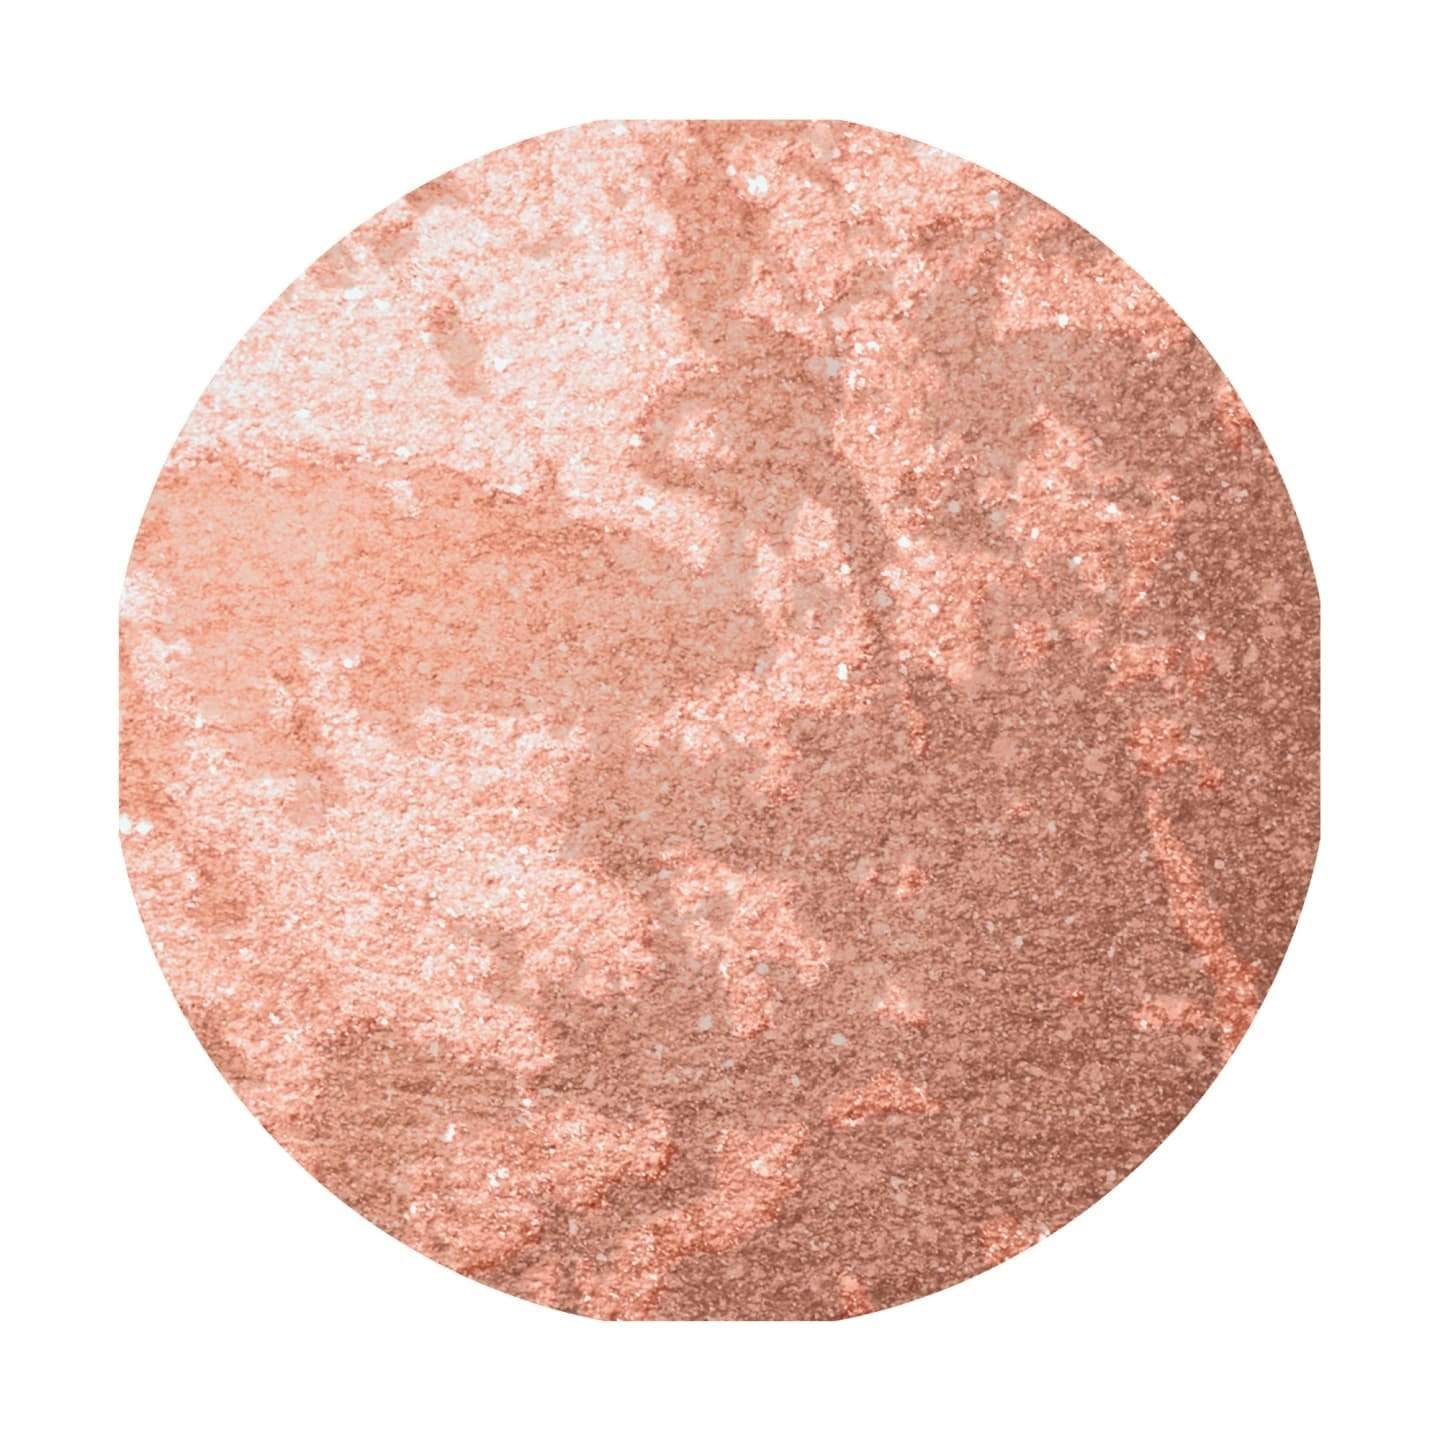 Max Factor Creme Puff Blush - Give Us Beauty